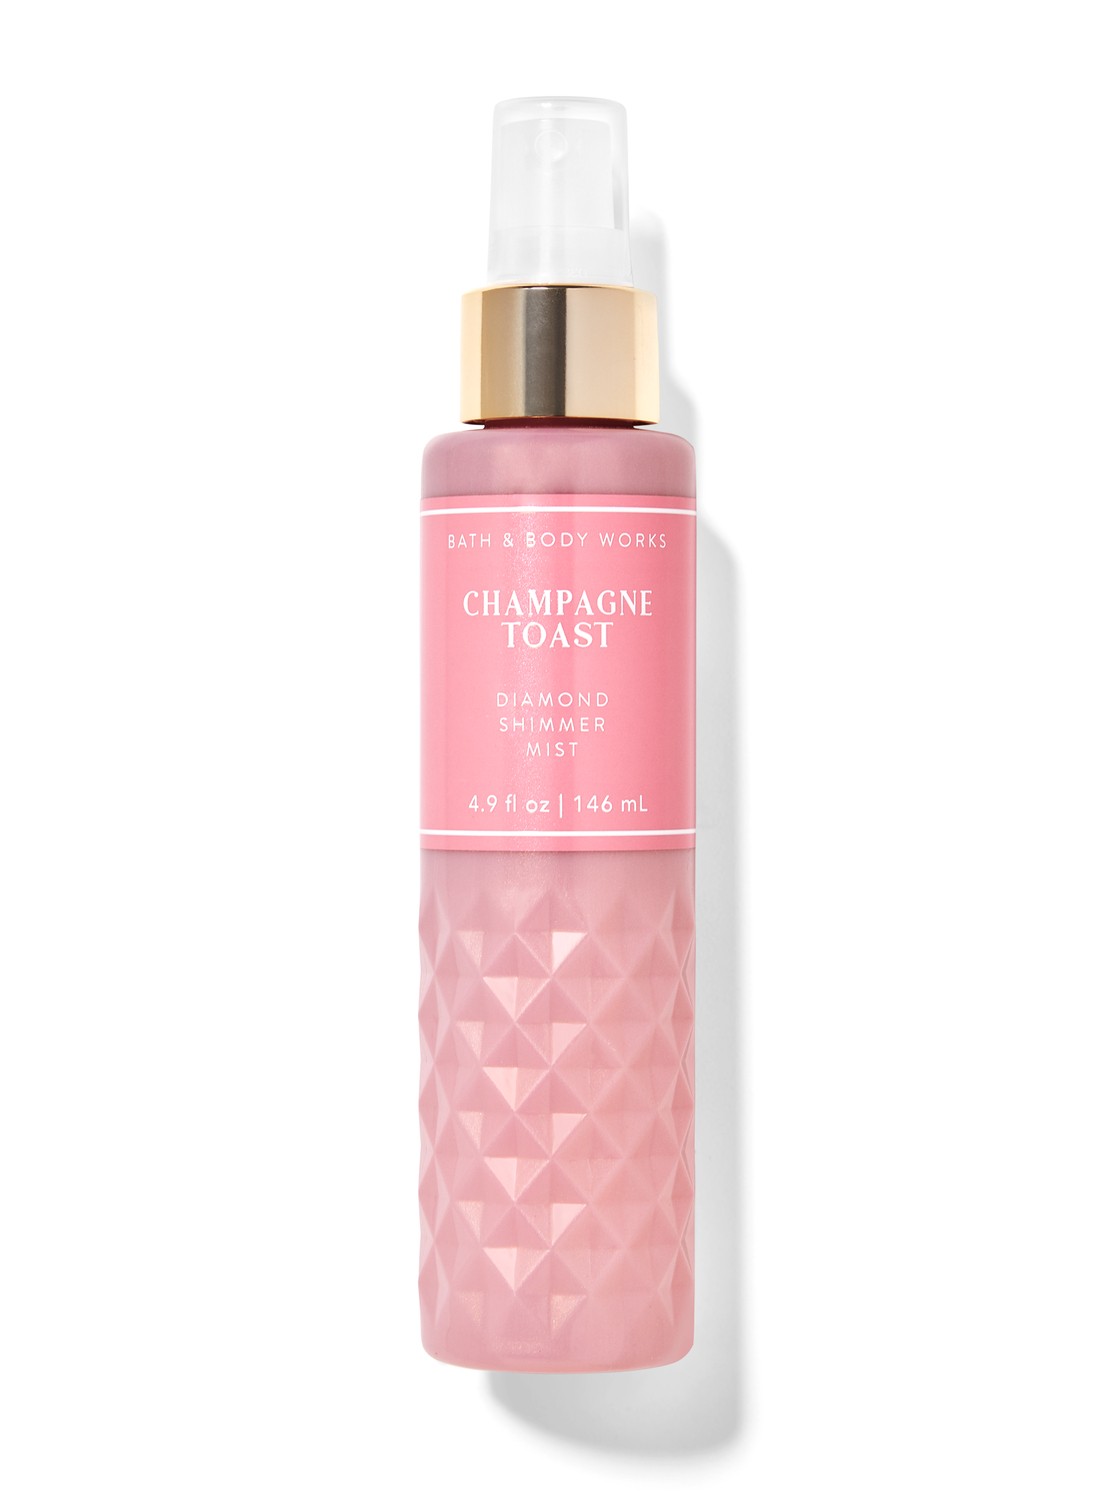 Champagne Toast|Bath & Body Works Australia Official Site